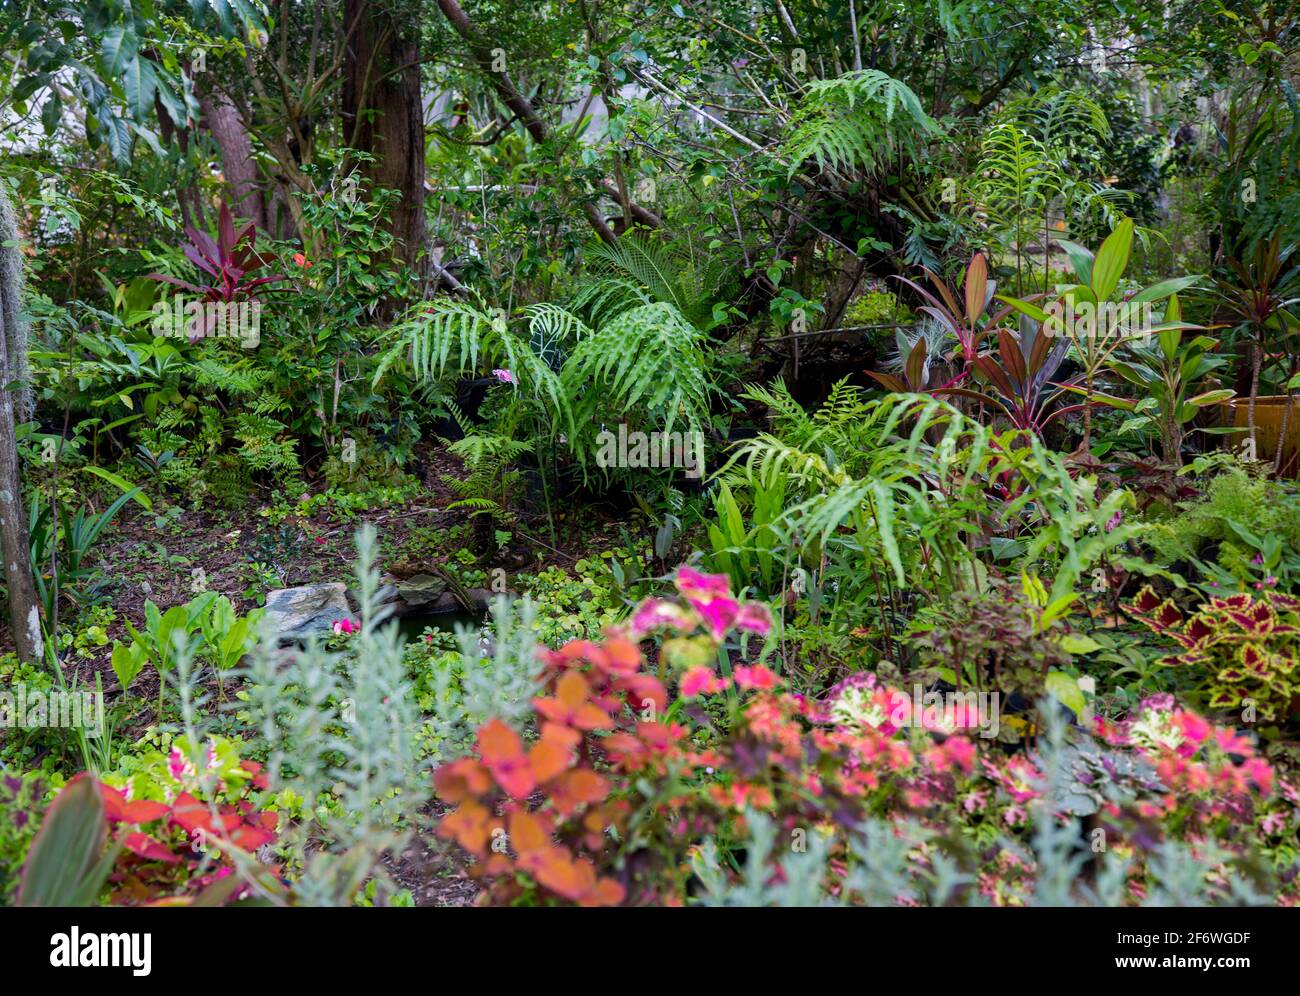 Lush sub-tropical garden with green ferns, colourful foliage plants - cordylines and coleus, beneath a canopy of trees in Australia Stock Photo